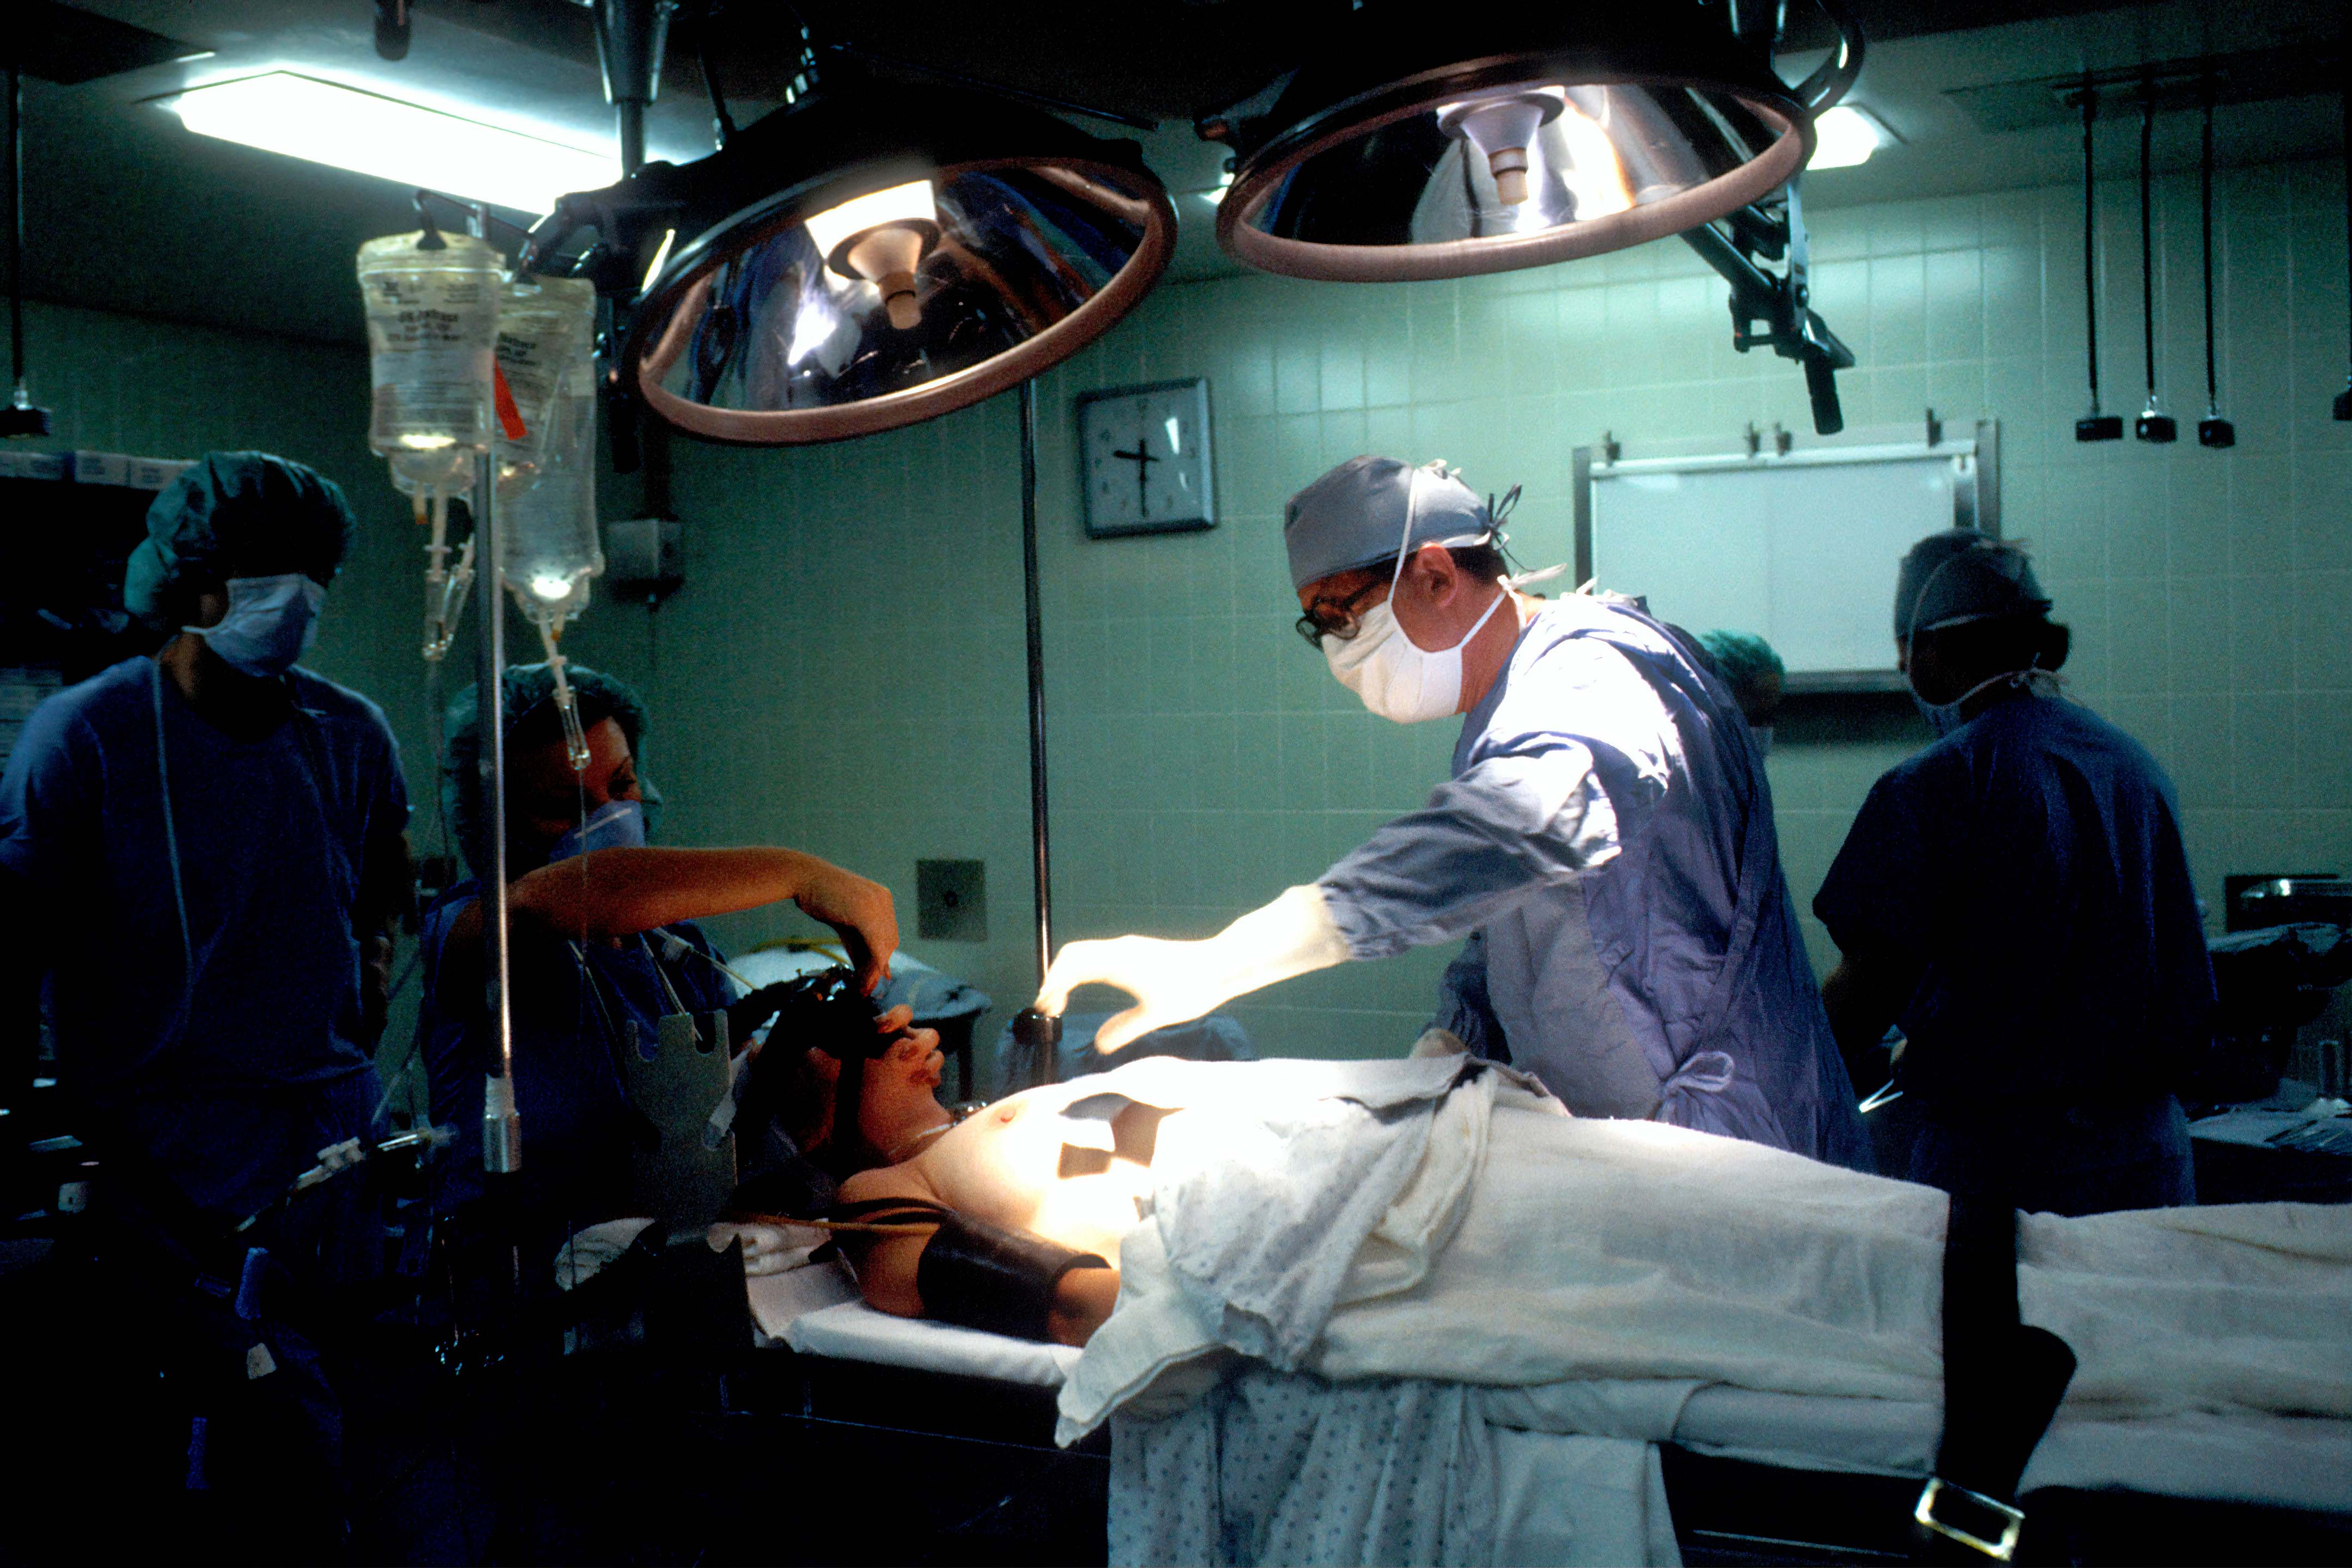 Surgeons prepping for a patient operation